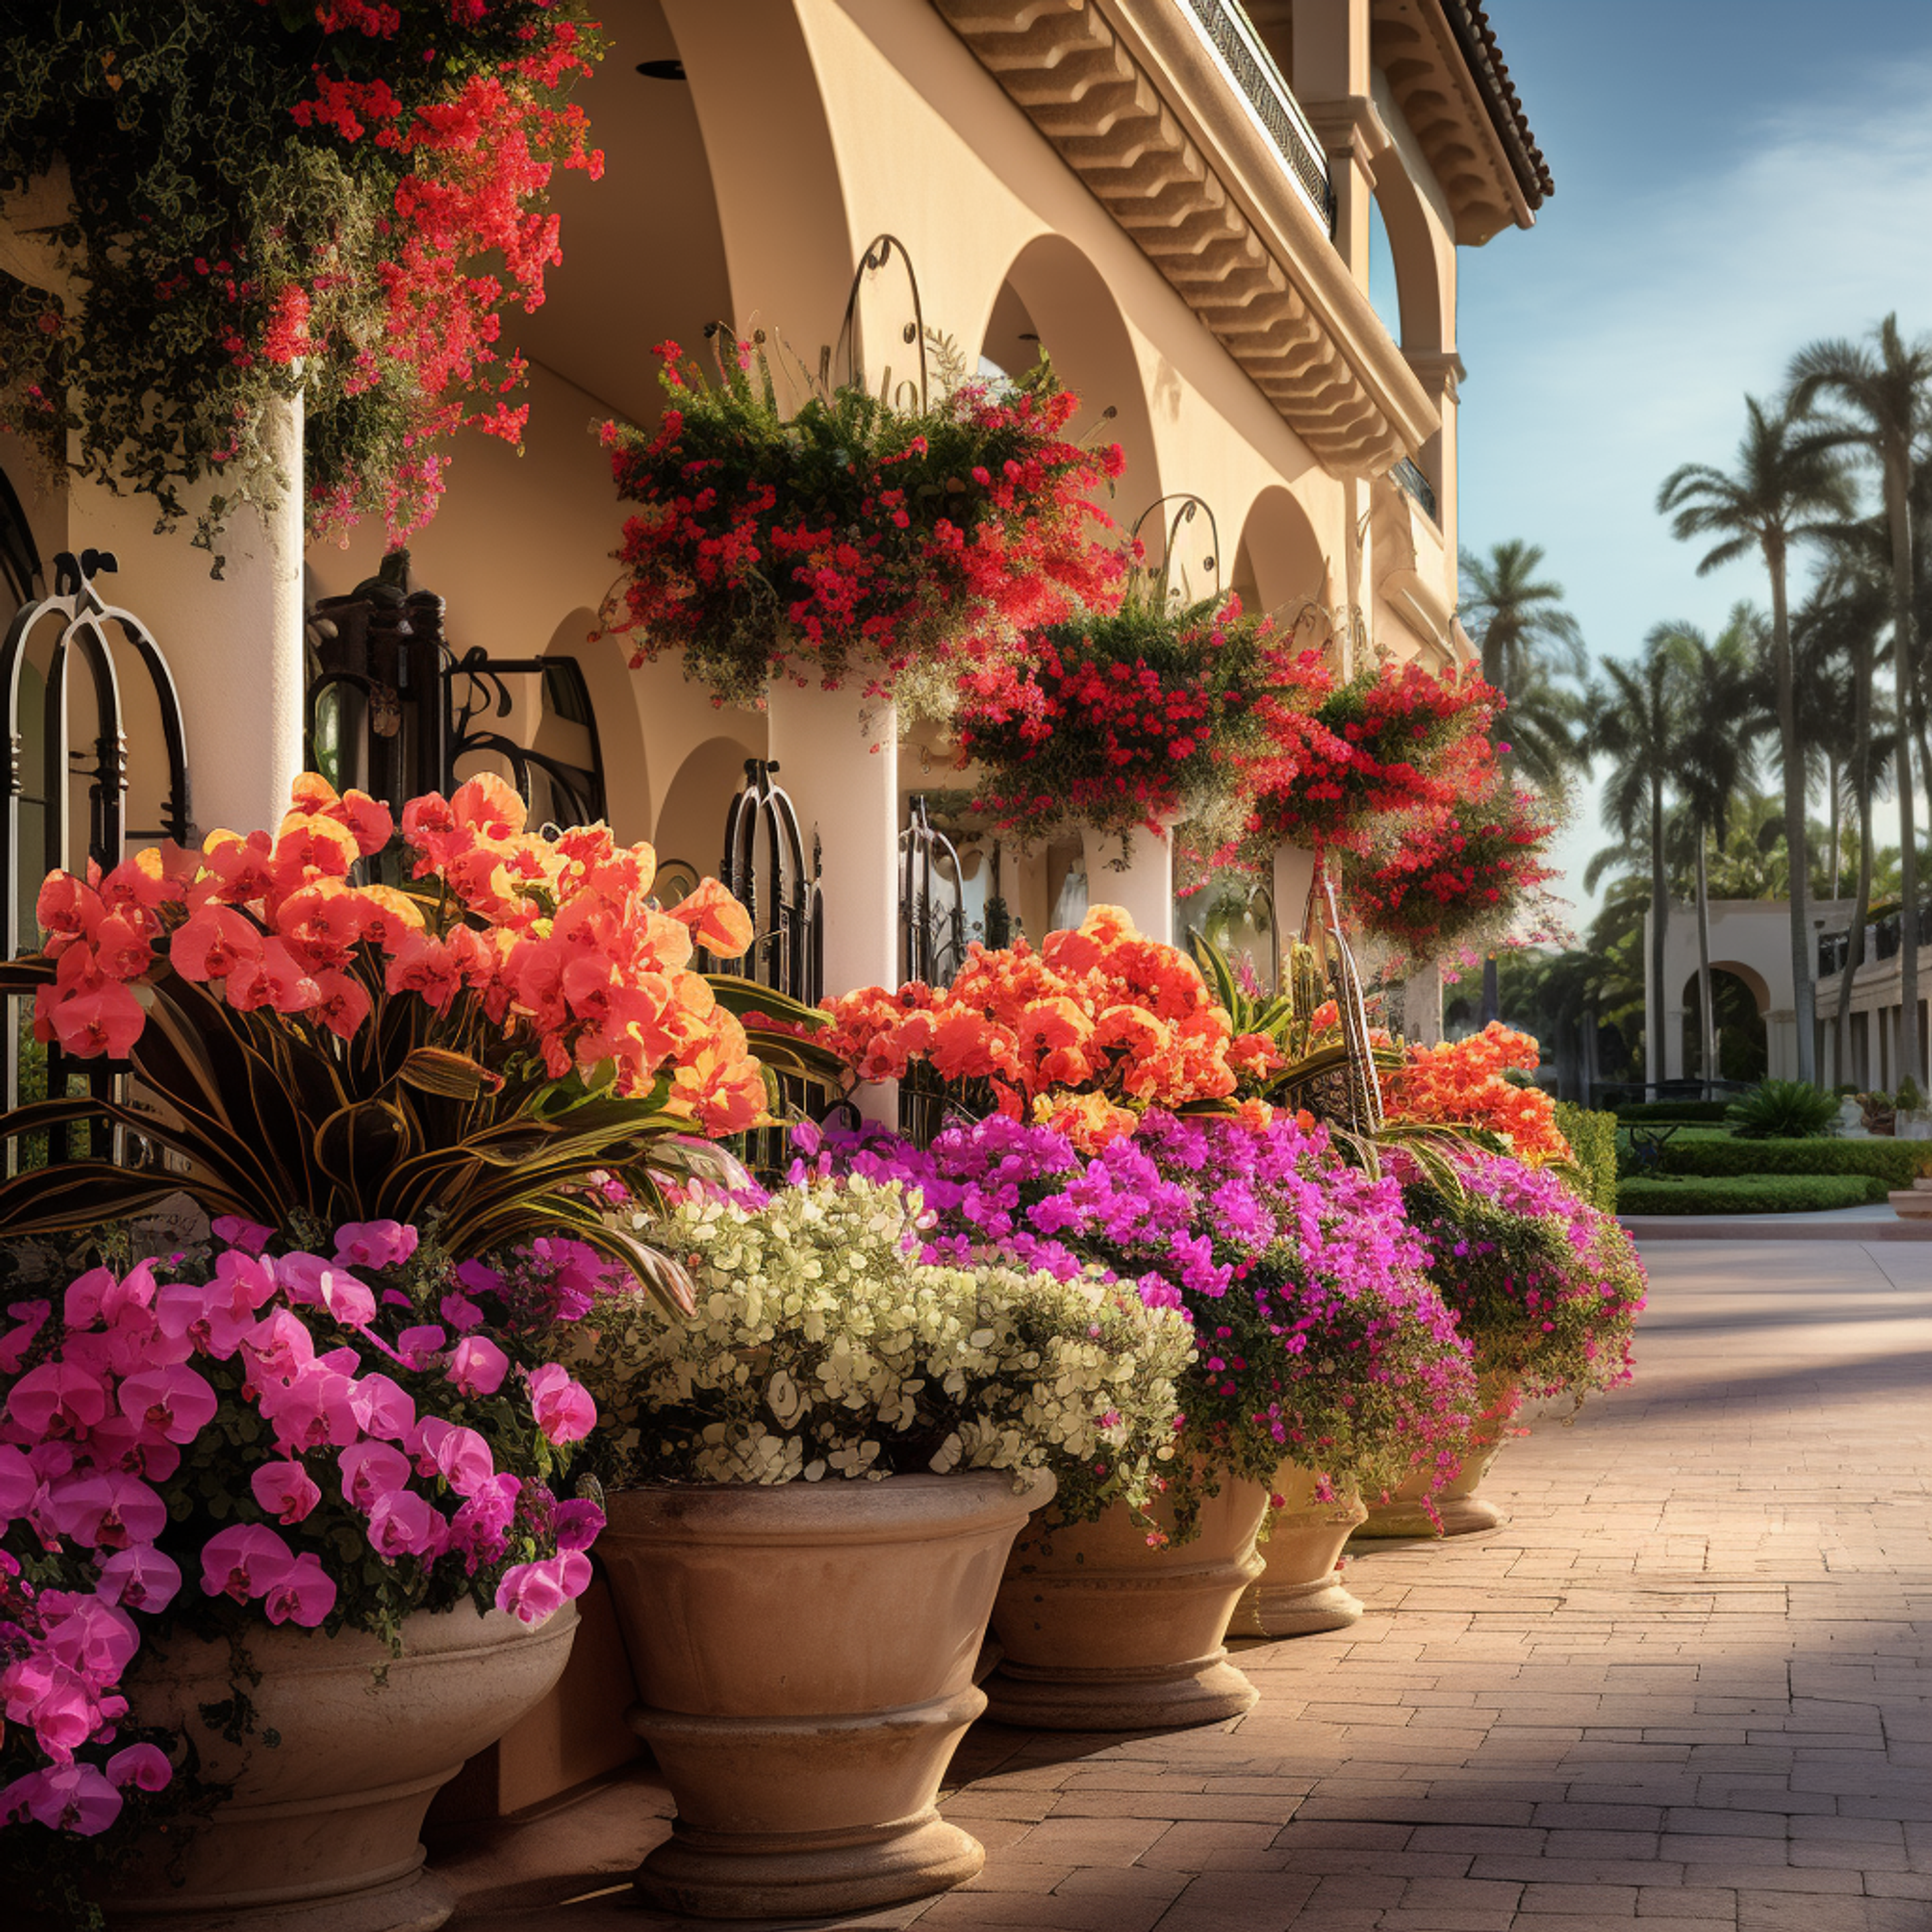 West Palm Beach Flower lined street Spanish style architecture and cobblestone street, palm trees in background